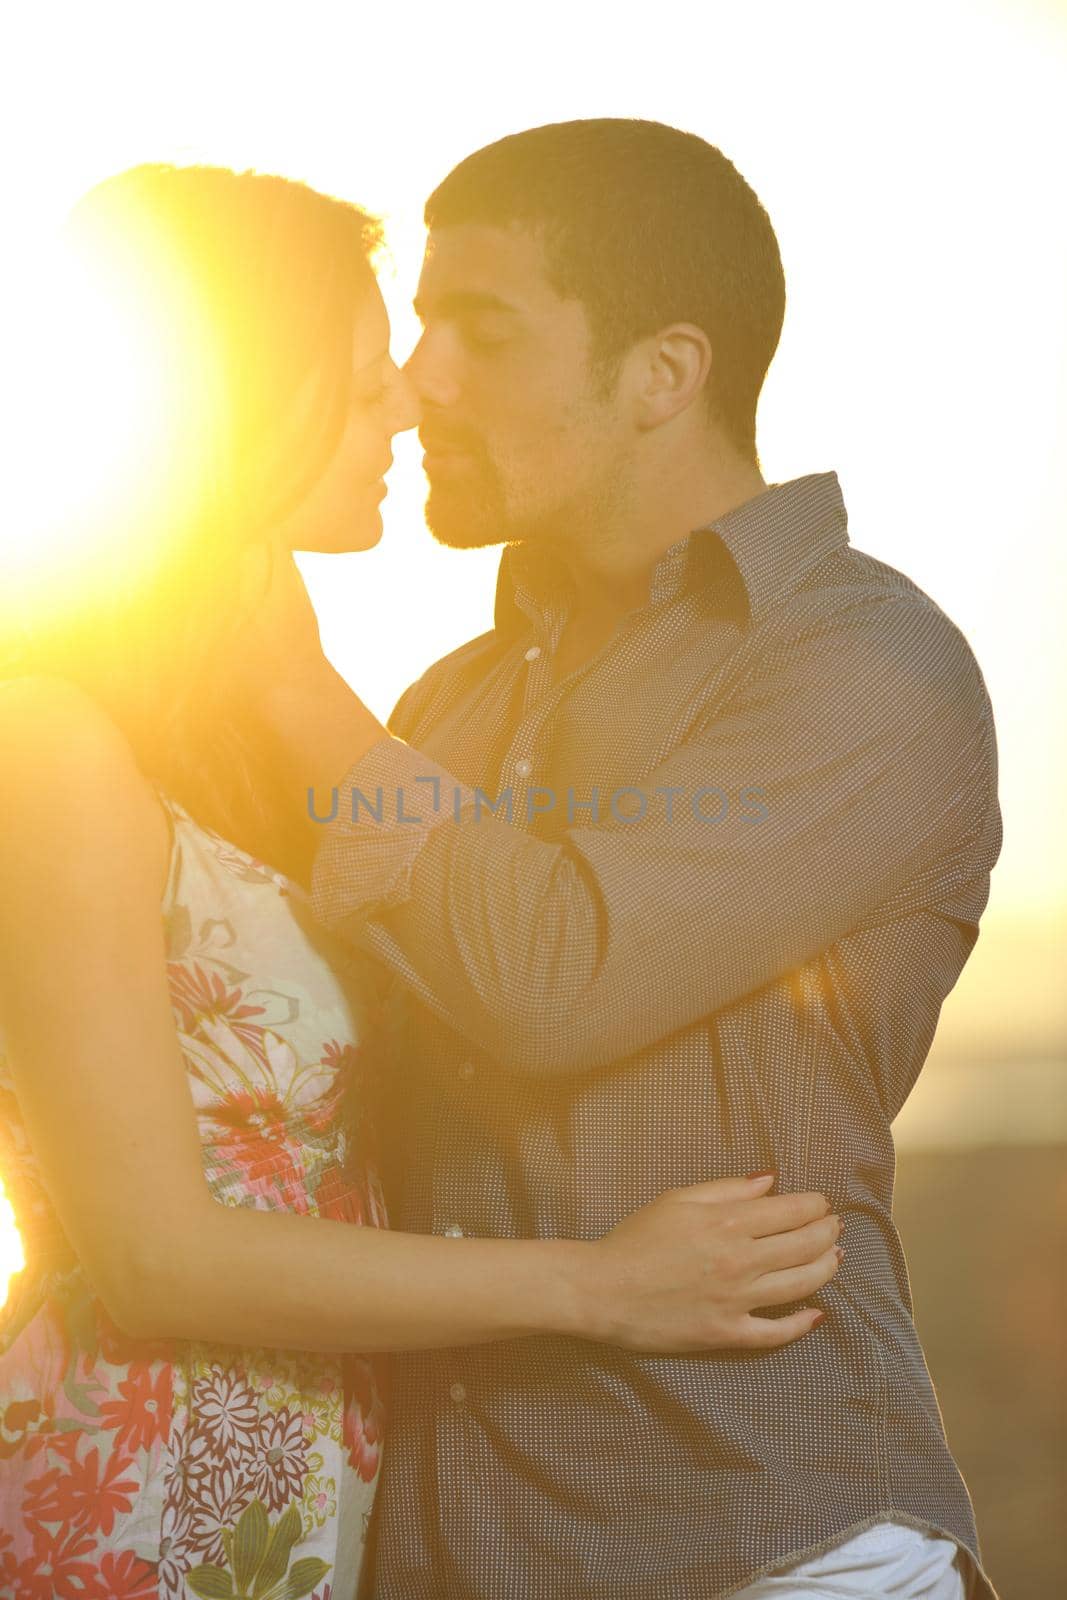 happy young couple have romantic time on beach at sunset